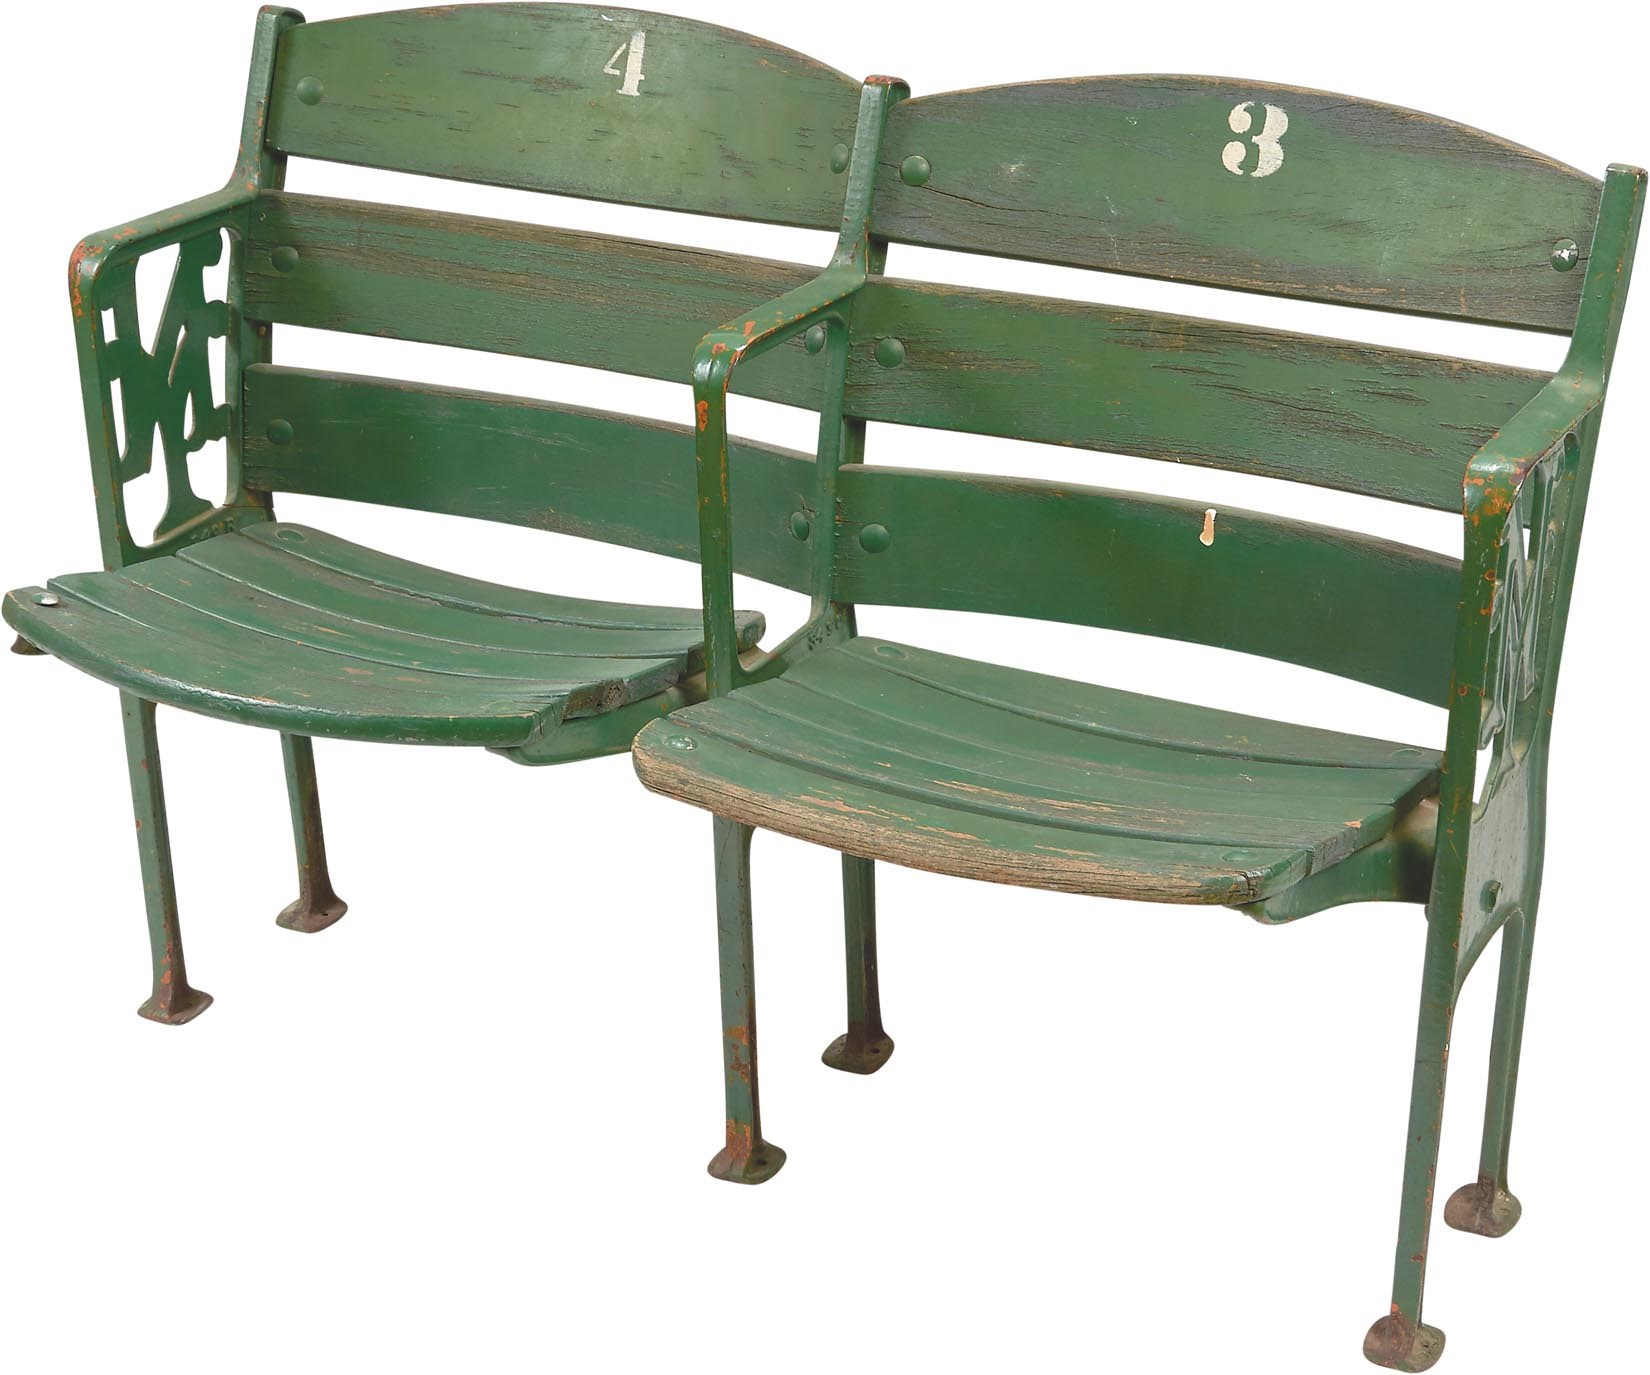 - Polo Grounds Double Figural Seats